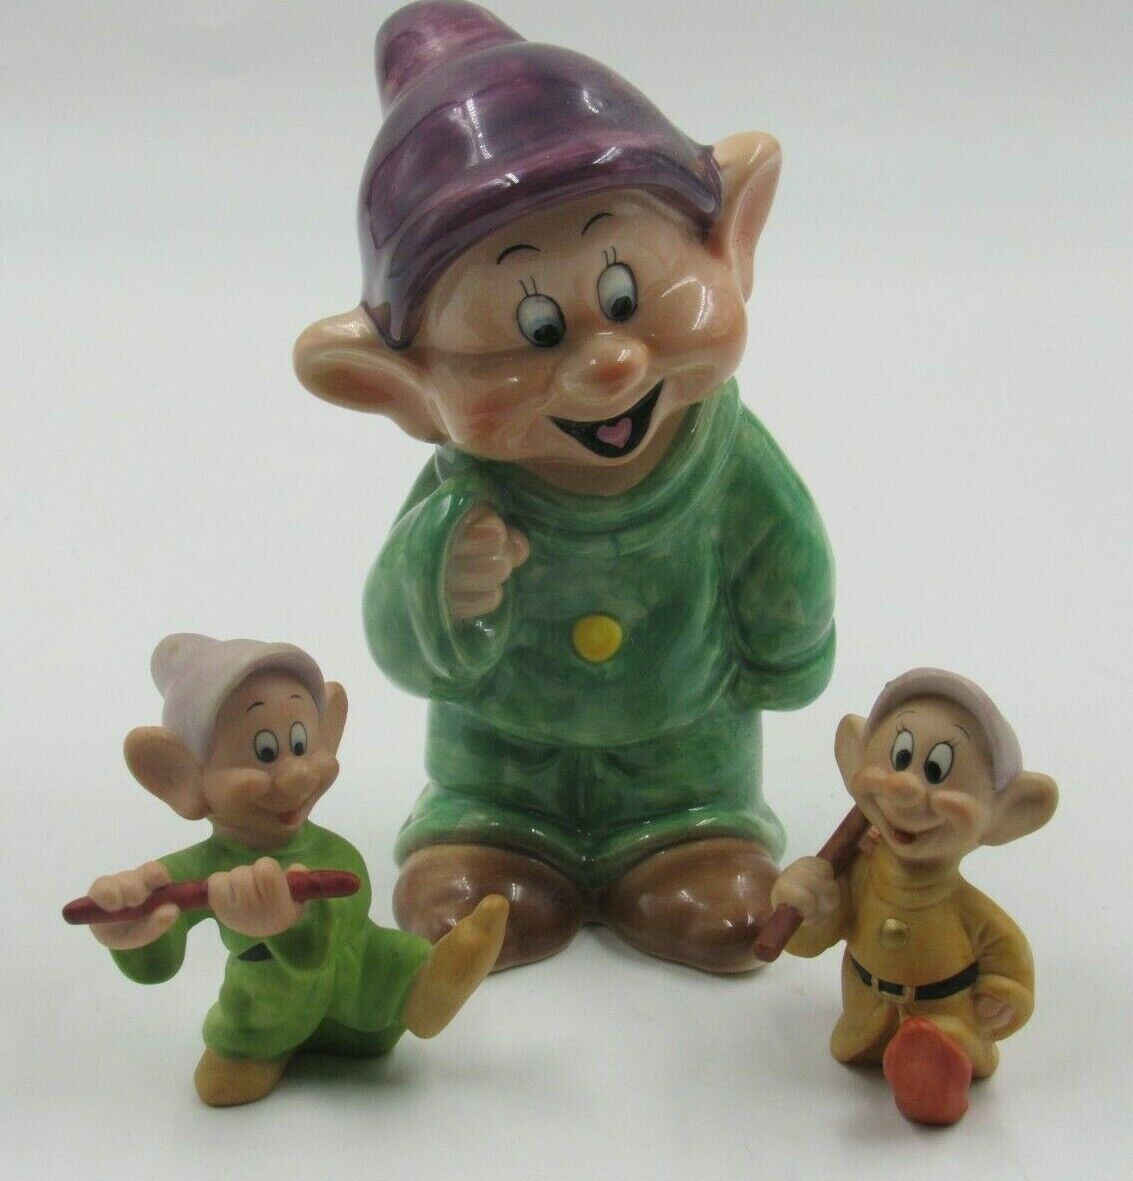 Vintage Dopey From Snow White And The Seven Dwarfs Figurine Lot Of 3